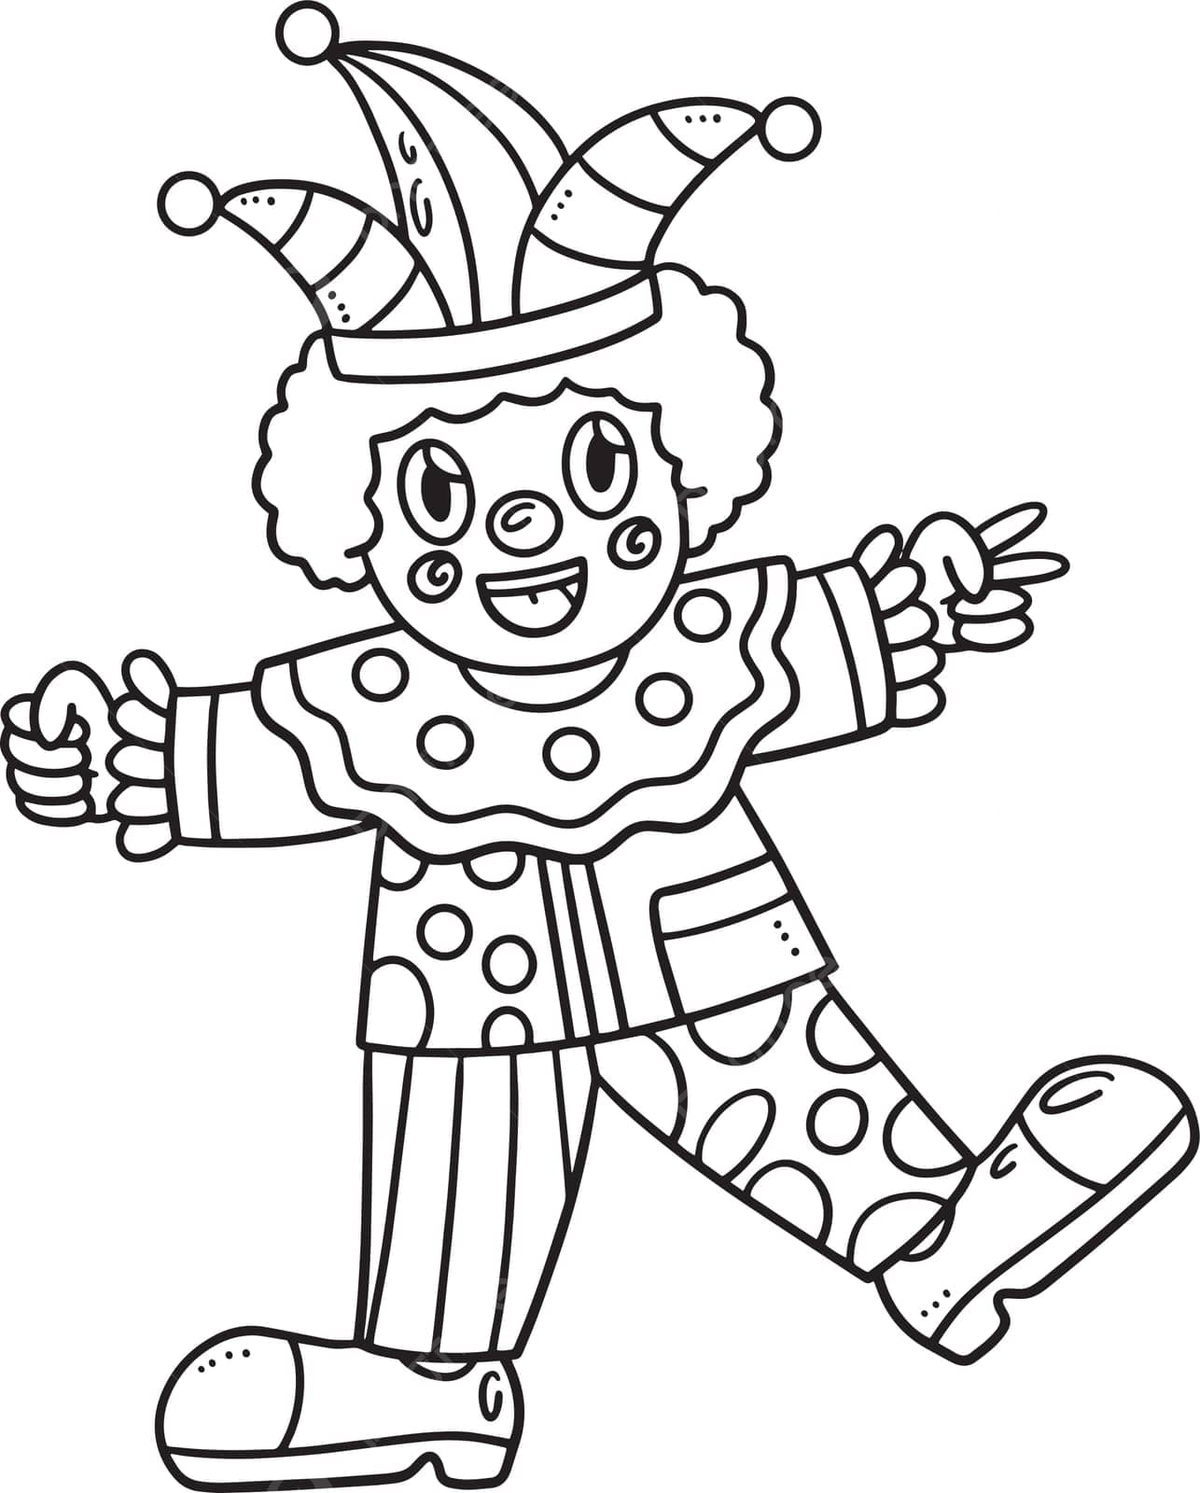 Birthday clown isolated coloring page for kids birthday clown hand drawn vector birthday drawing ring drawing kid drawing png and vector with transparent background for free download